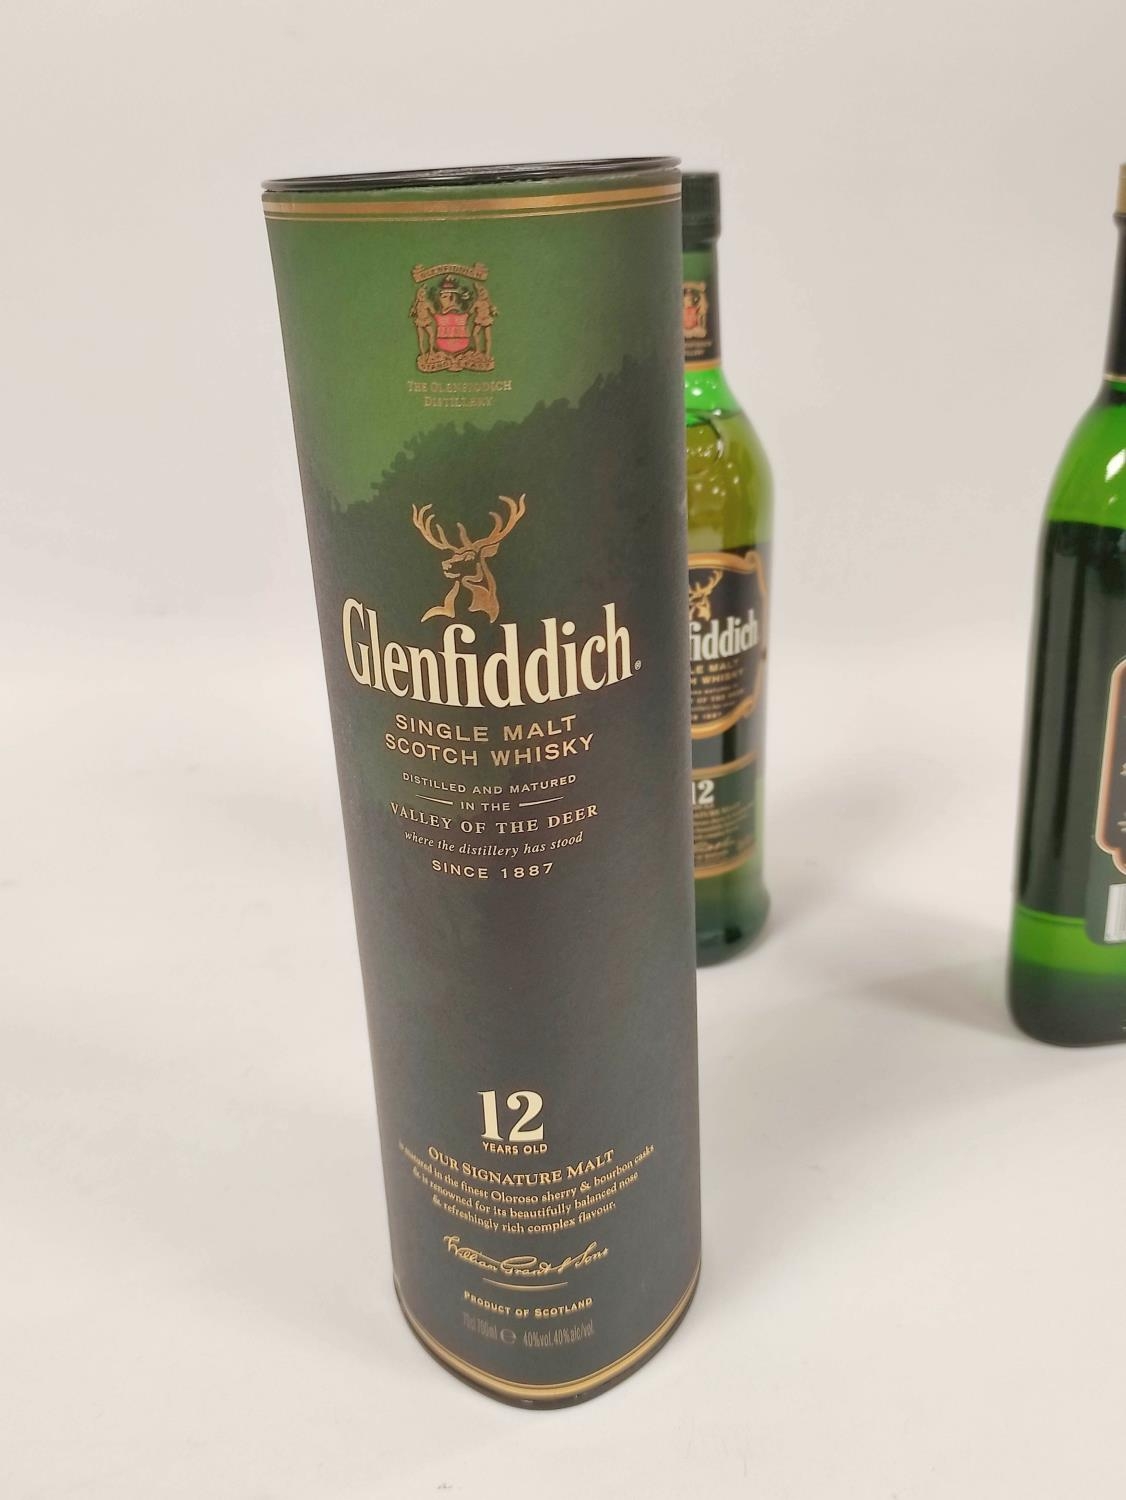 Glenfiddich 12 years old single malt Scotch whisky, 70cl, 40% vol, boxed, with Glenfiddich Special - Image 4 of 4